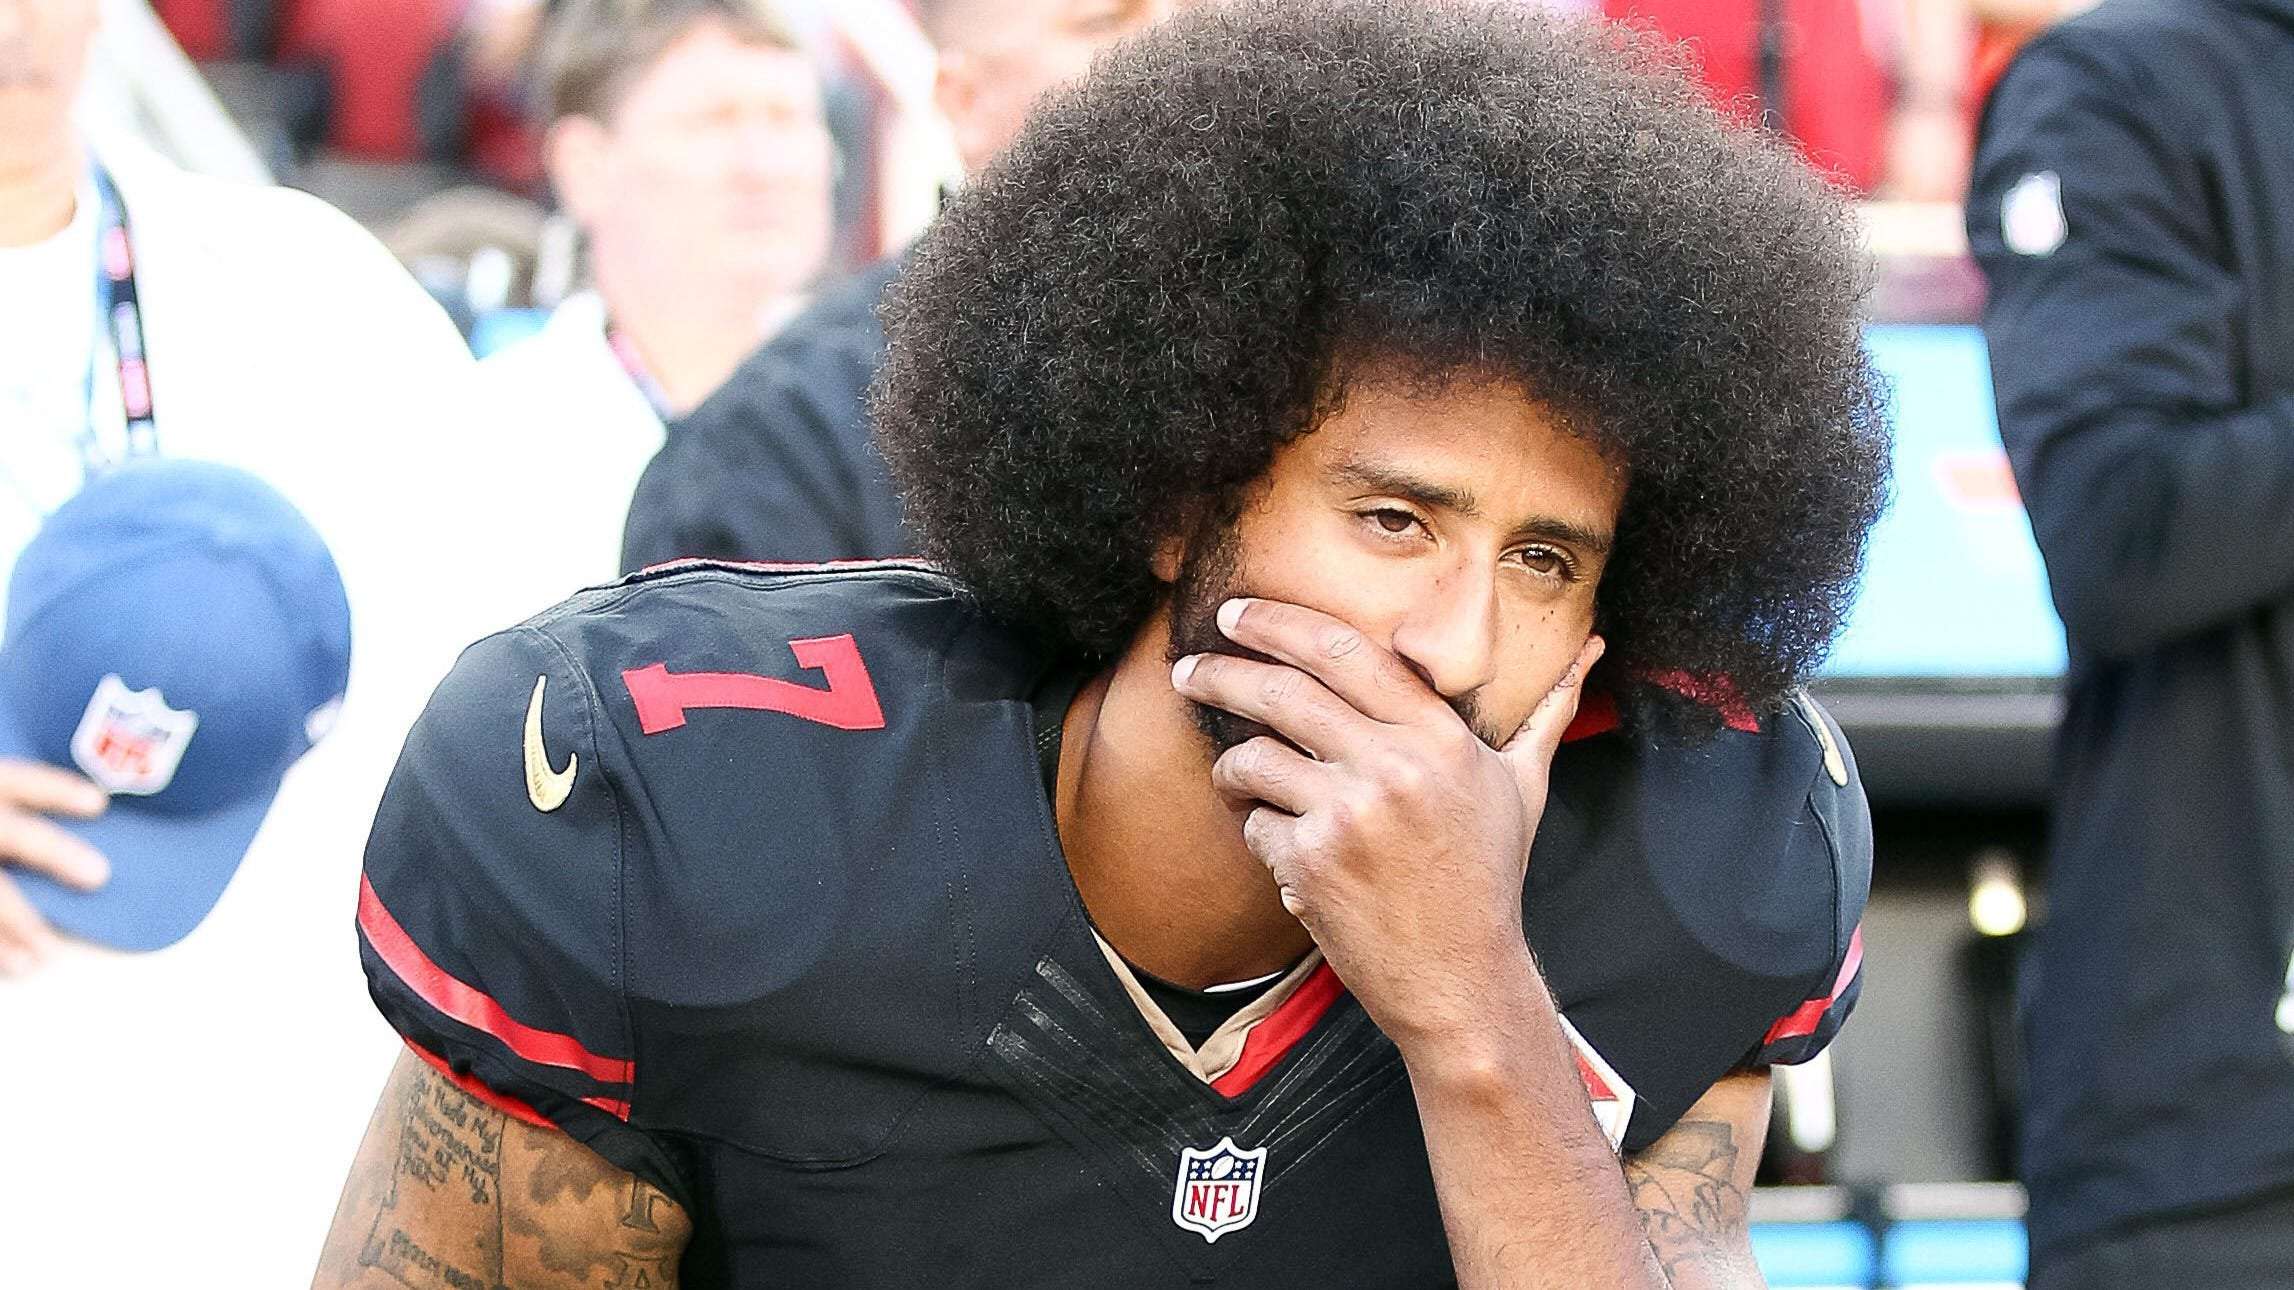 image for Colin Kaepernick offers protesters legal help after George Floyd death